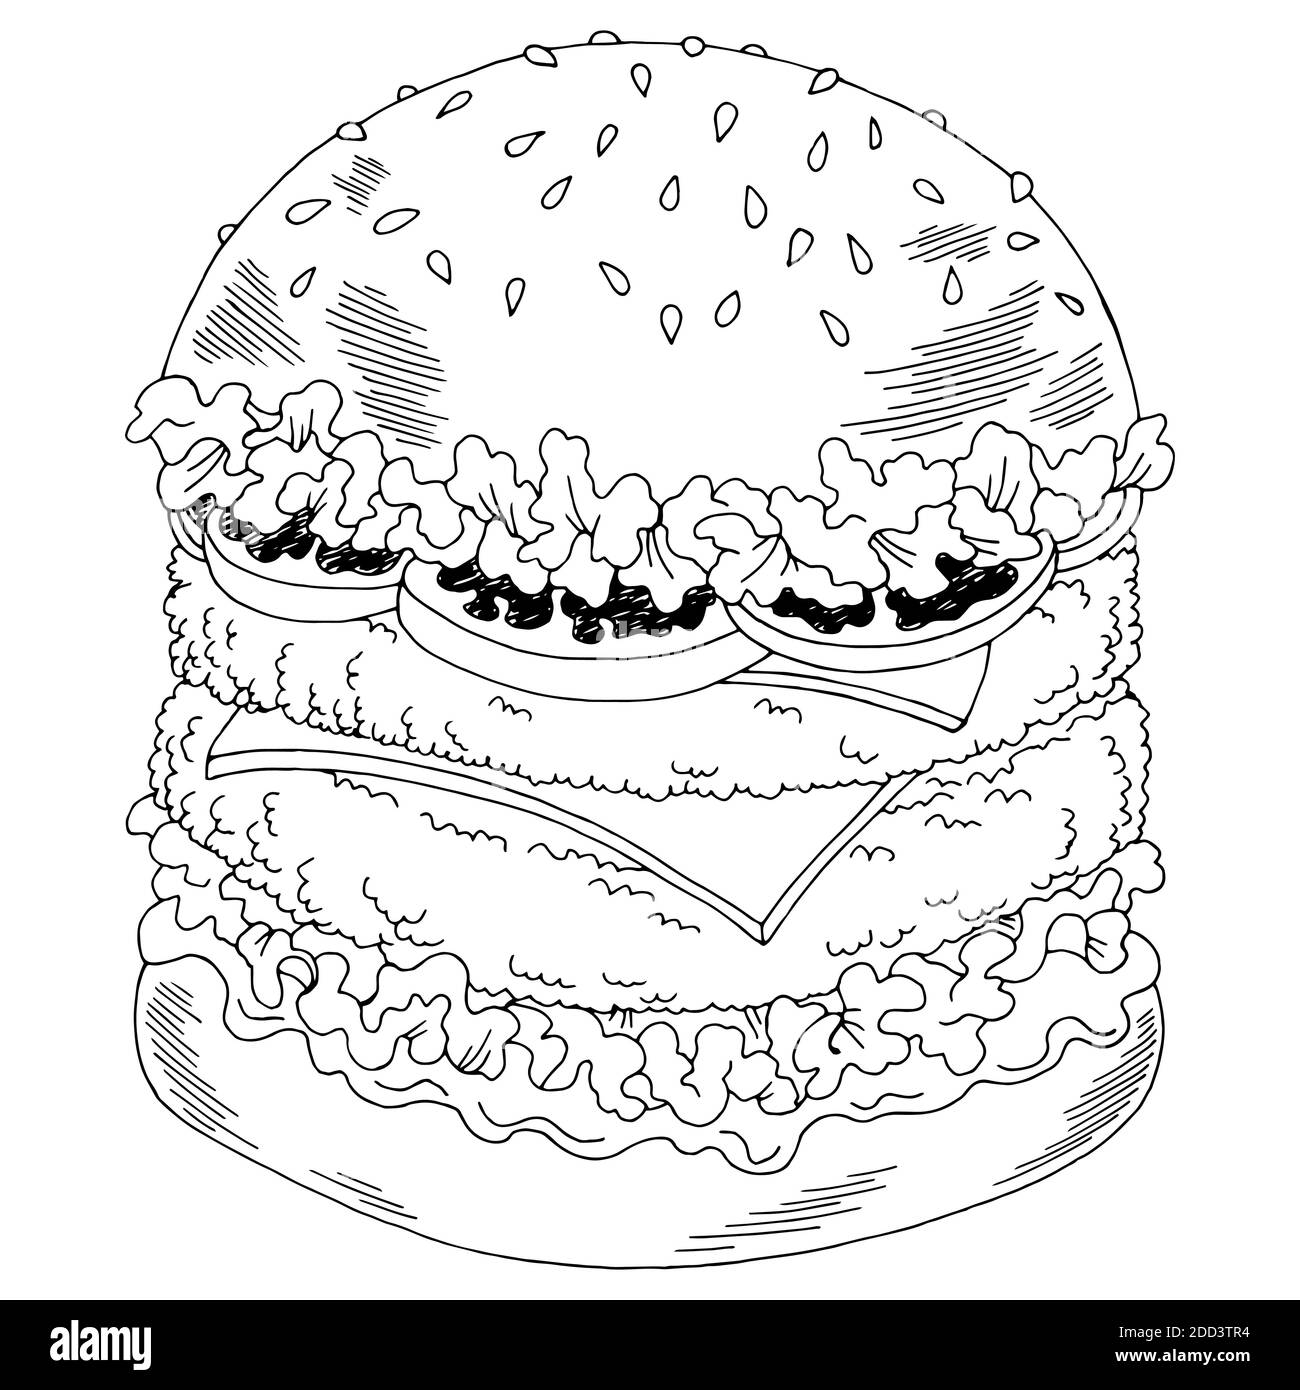 Hamburger graphic fast food black white sketch isolated illustration vector Stock Vector